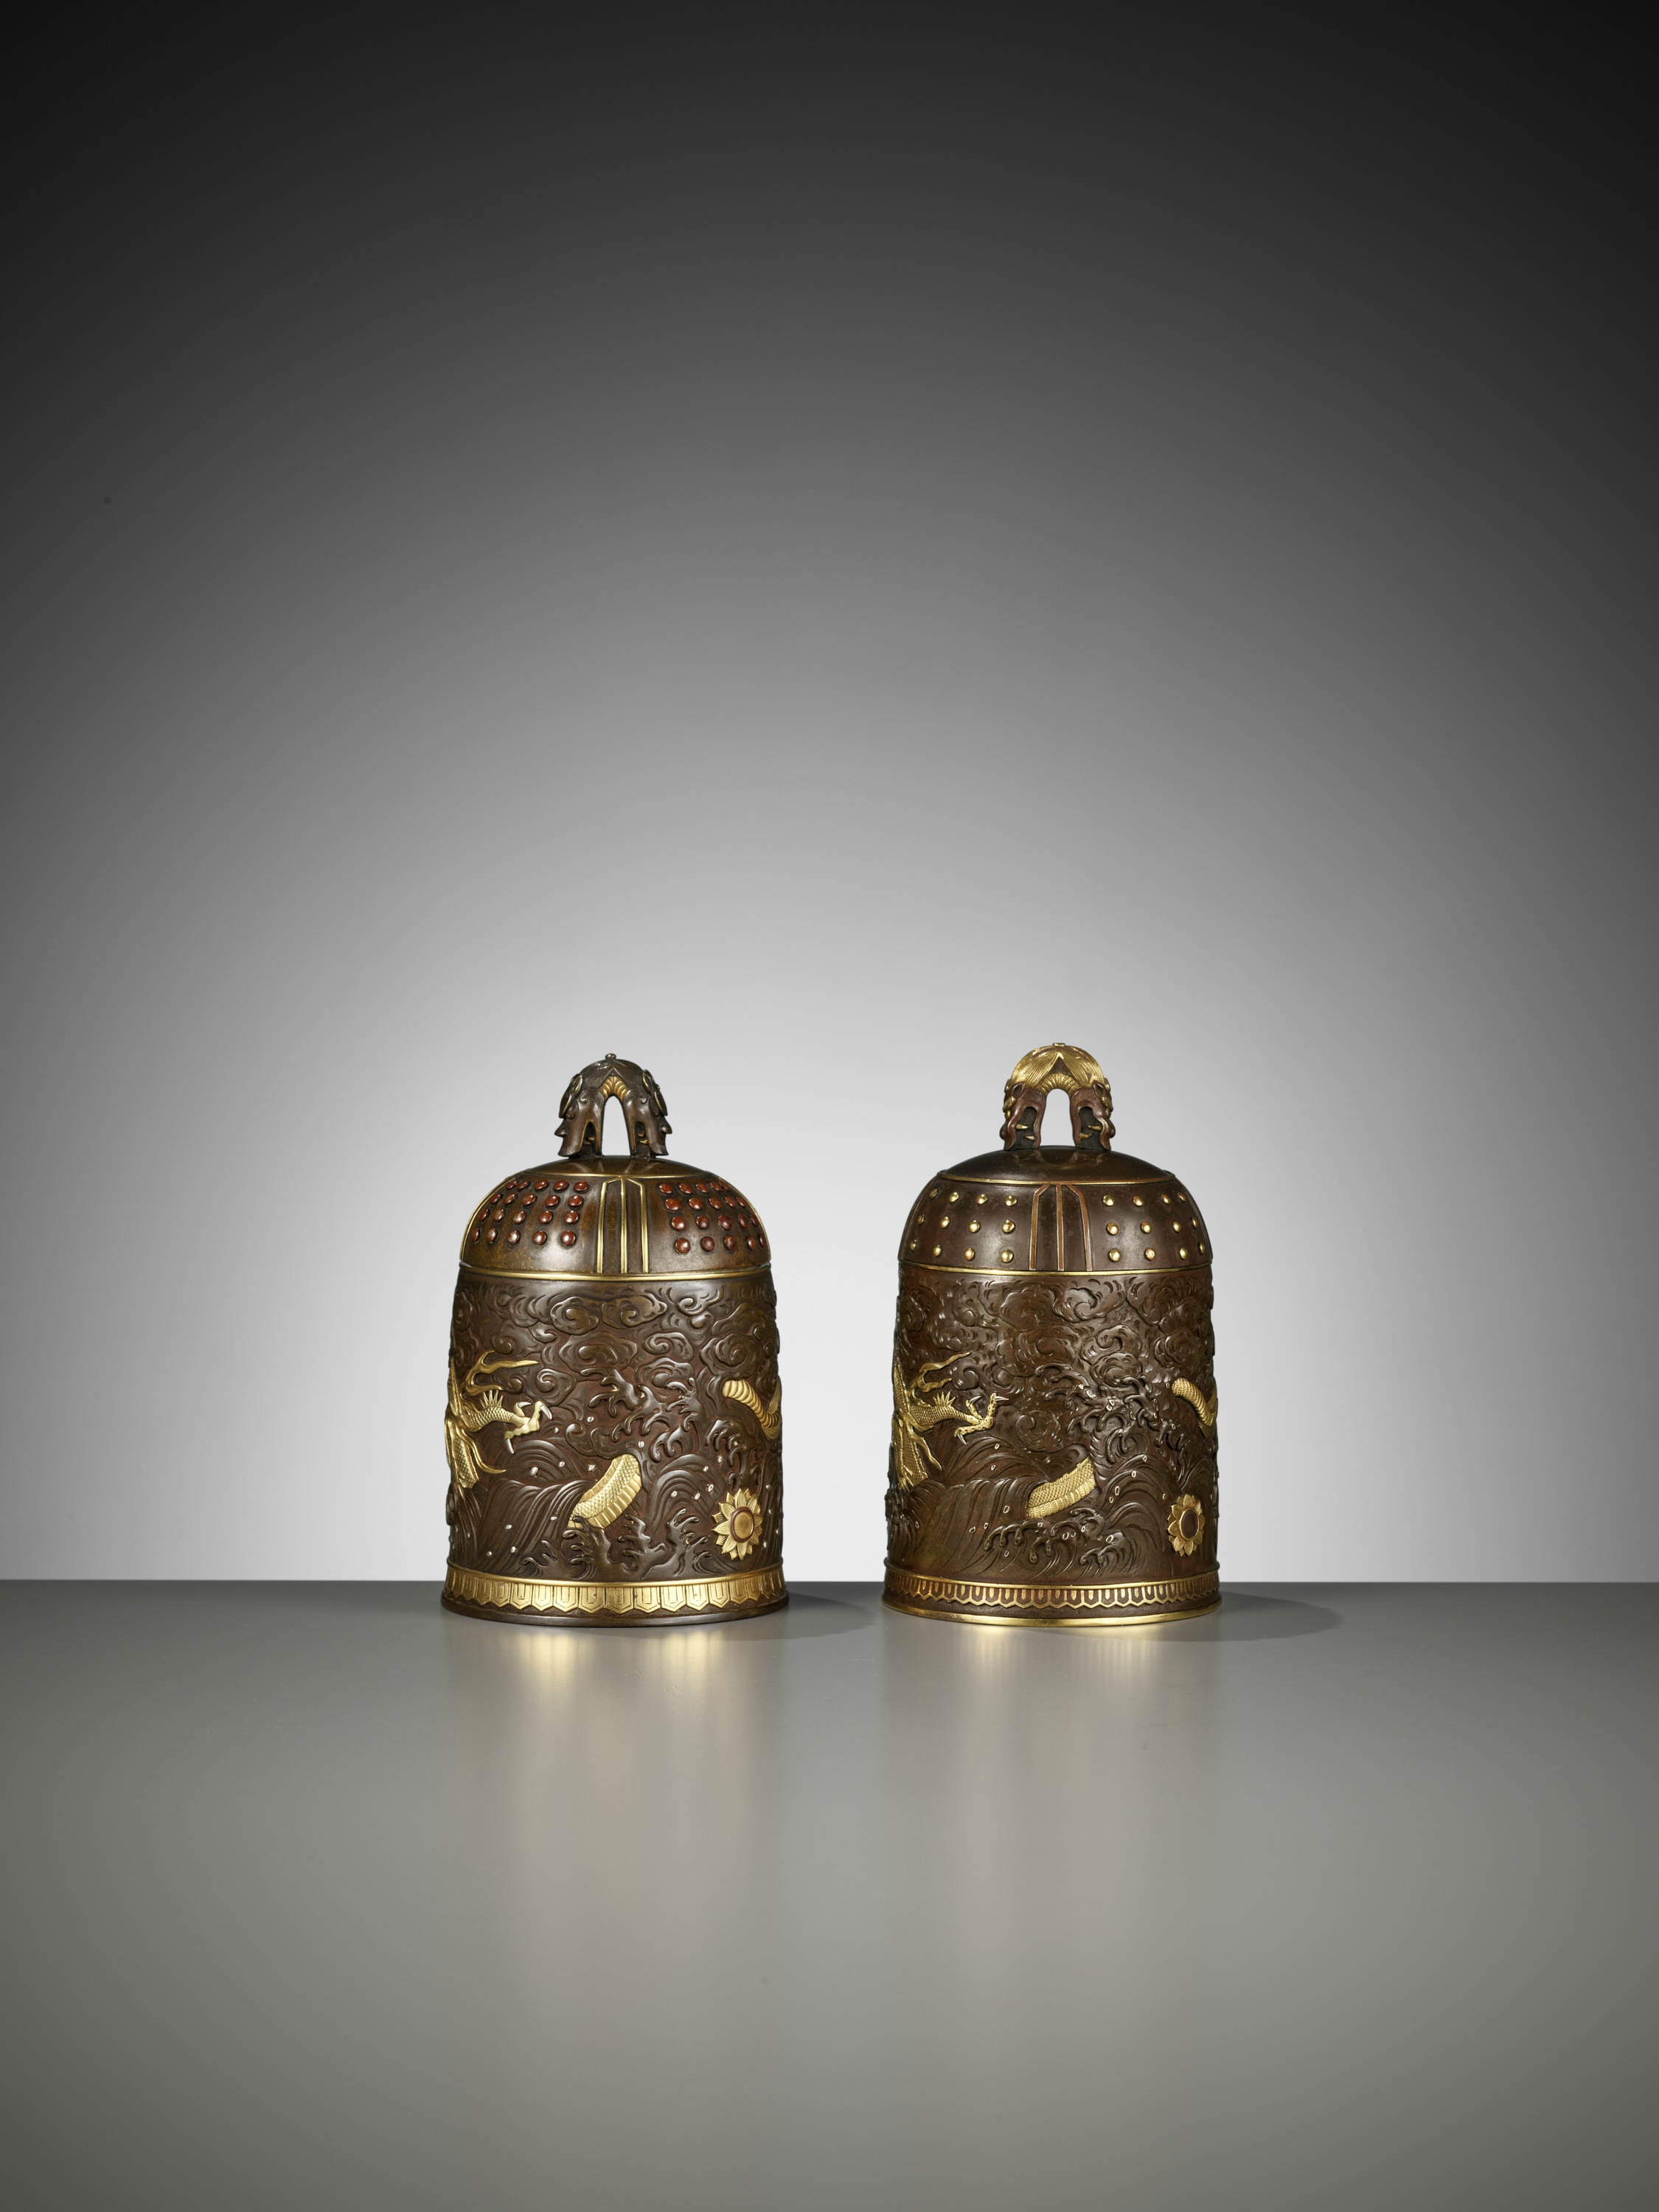 A MATCHED PAIR OF GOLD-INLAID BRONZE 'BUDDHIST TEMPLE BELL' KOGO, ONE BY MIYABE ATSUYOSHI - Image 8 of 15